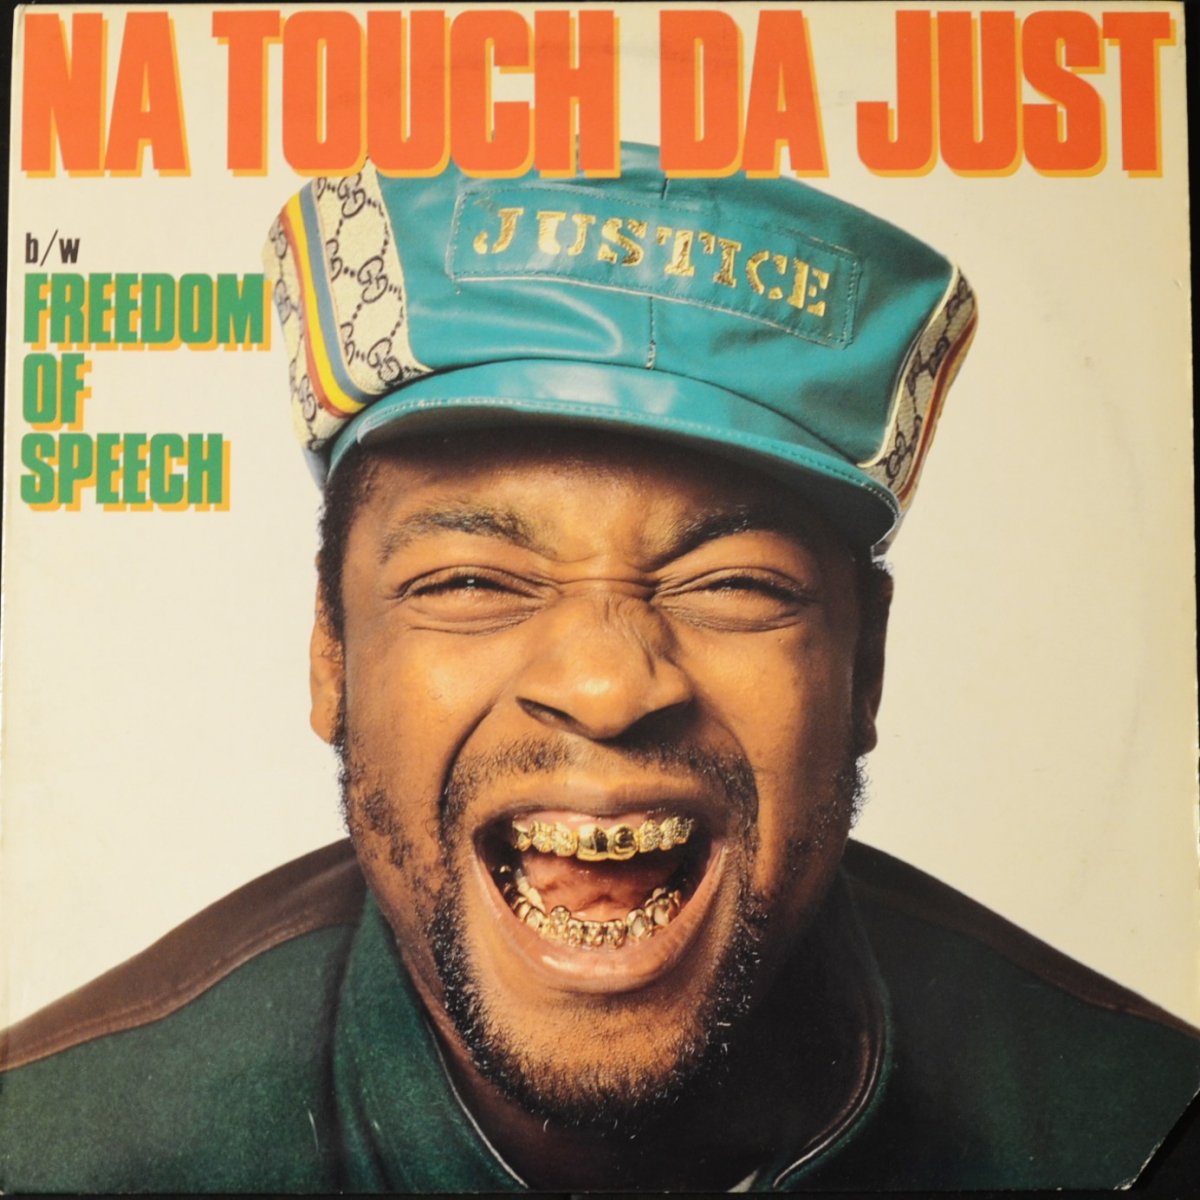 JUST-ICE ‎/ NA TOUCH DA JUST / FREEDOM OF SPEECH '88 (12